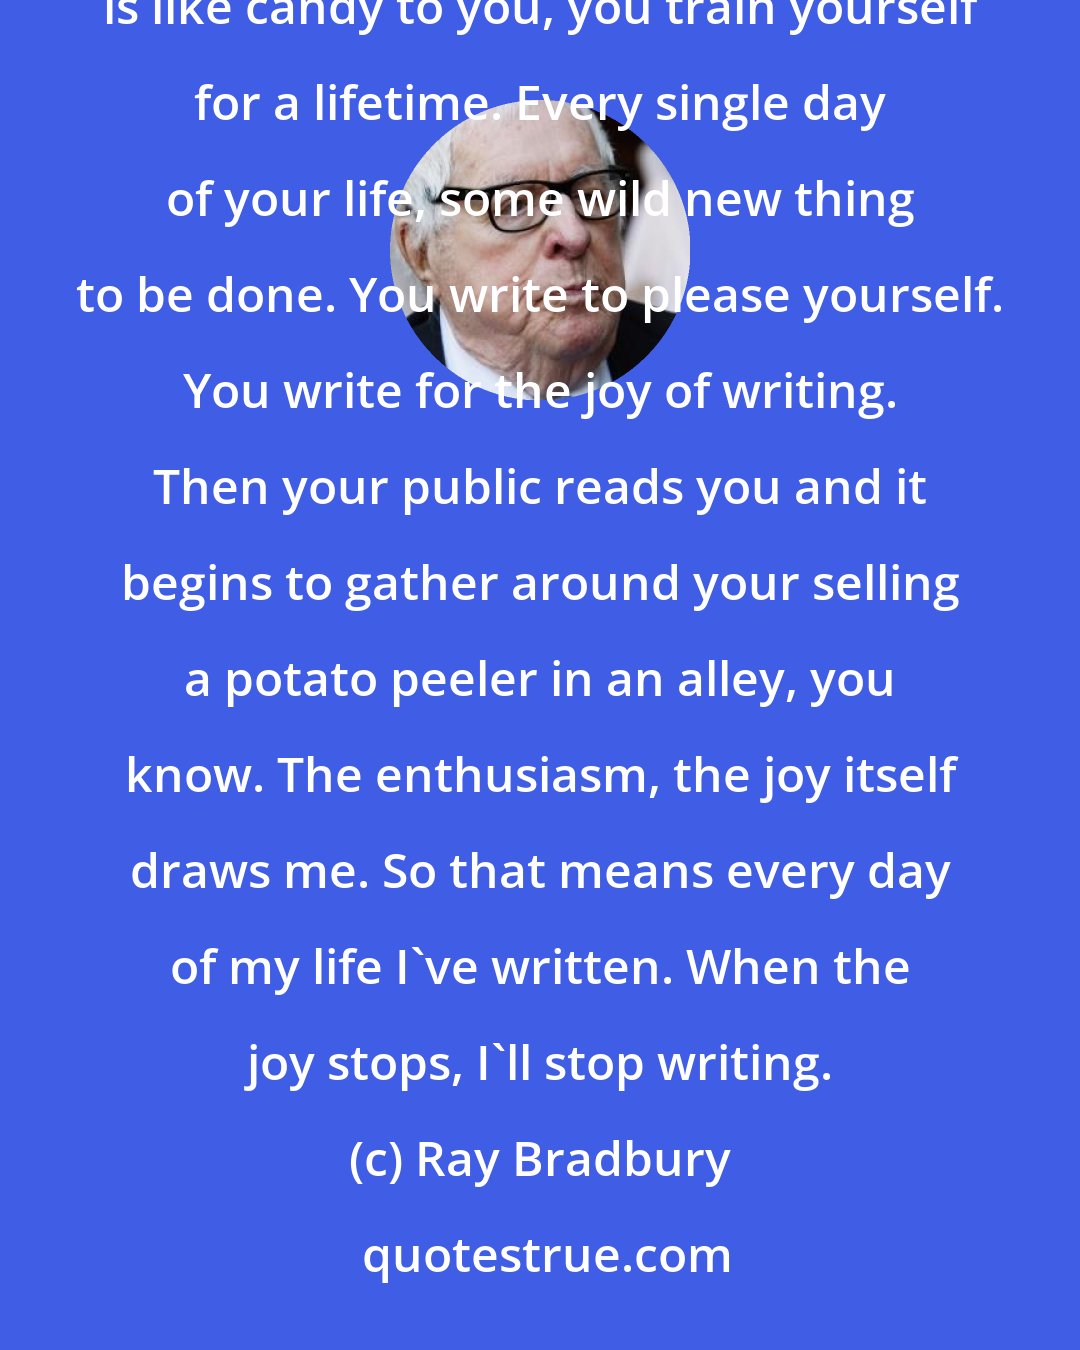 Ray Bradbury: I am a dedicated madman, and that becomes its own training. If you can't resist, if the typewriter is like candy to you, you train yourself for a lifetime. Every single day of your life, some wild new thing to be done. You write to please yourself. You write for the joy of writing. Then your public reads you and it begins to gather around your selling a potato peeler in an alley, you know. The enthusiasm, the joy itself draws me. So that means every day of my life I've written. When the joy stops, I'll stop writing.